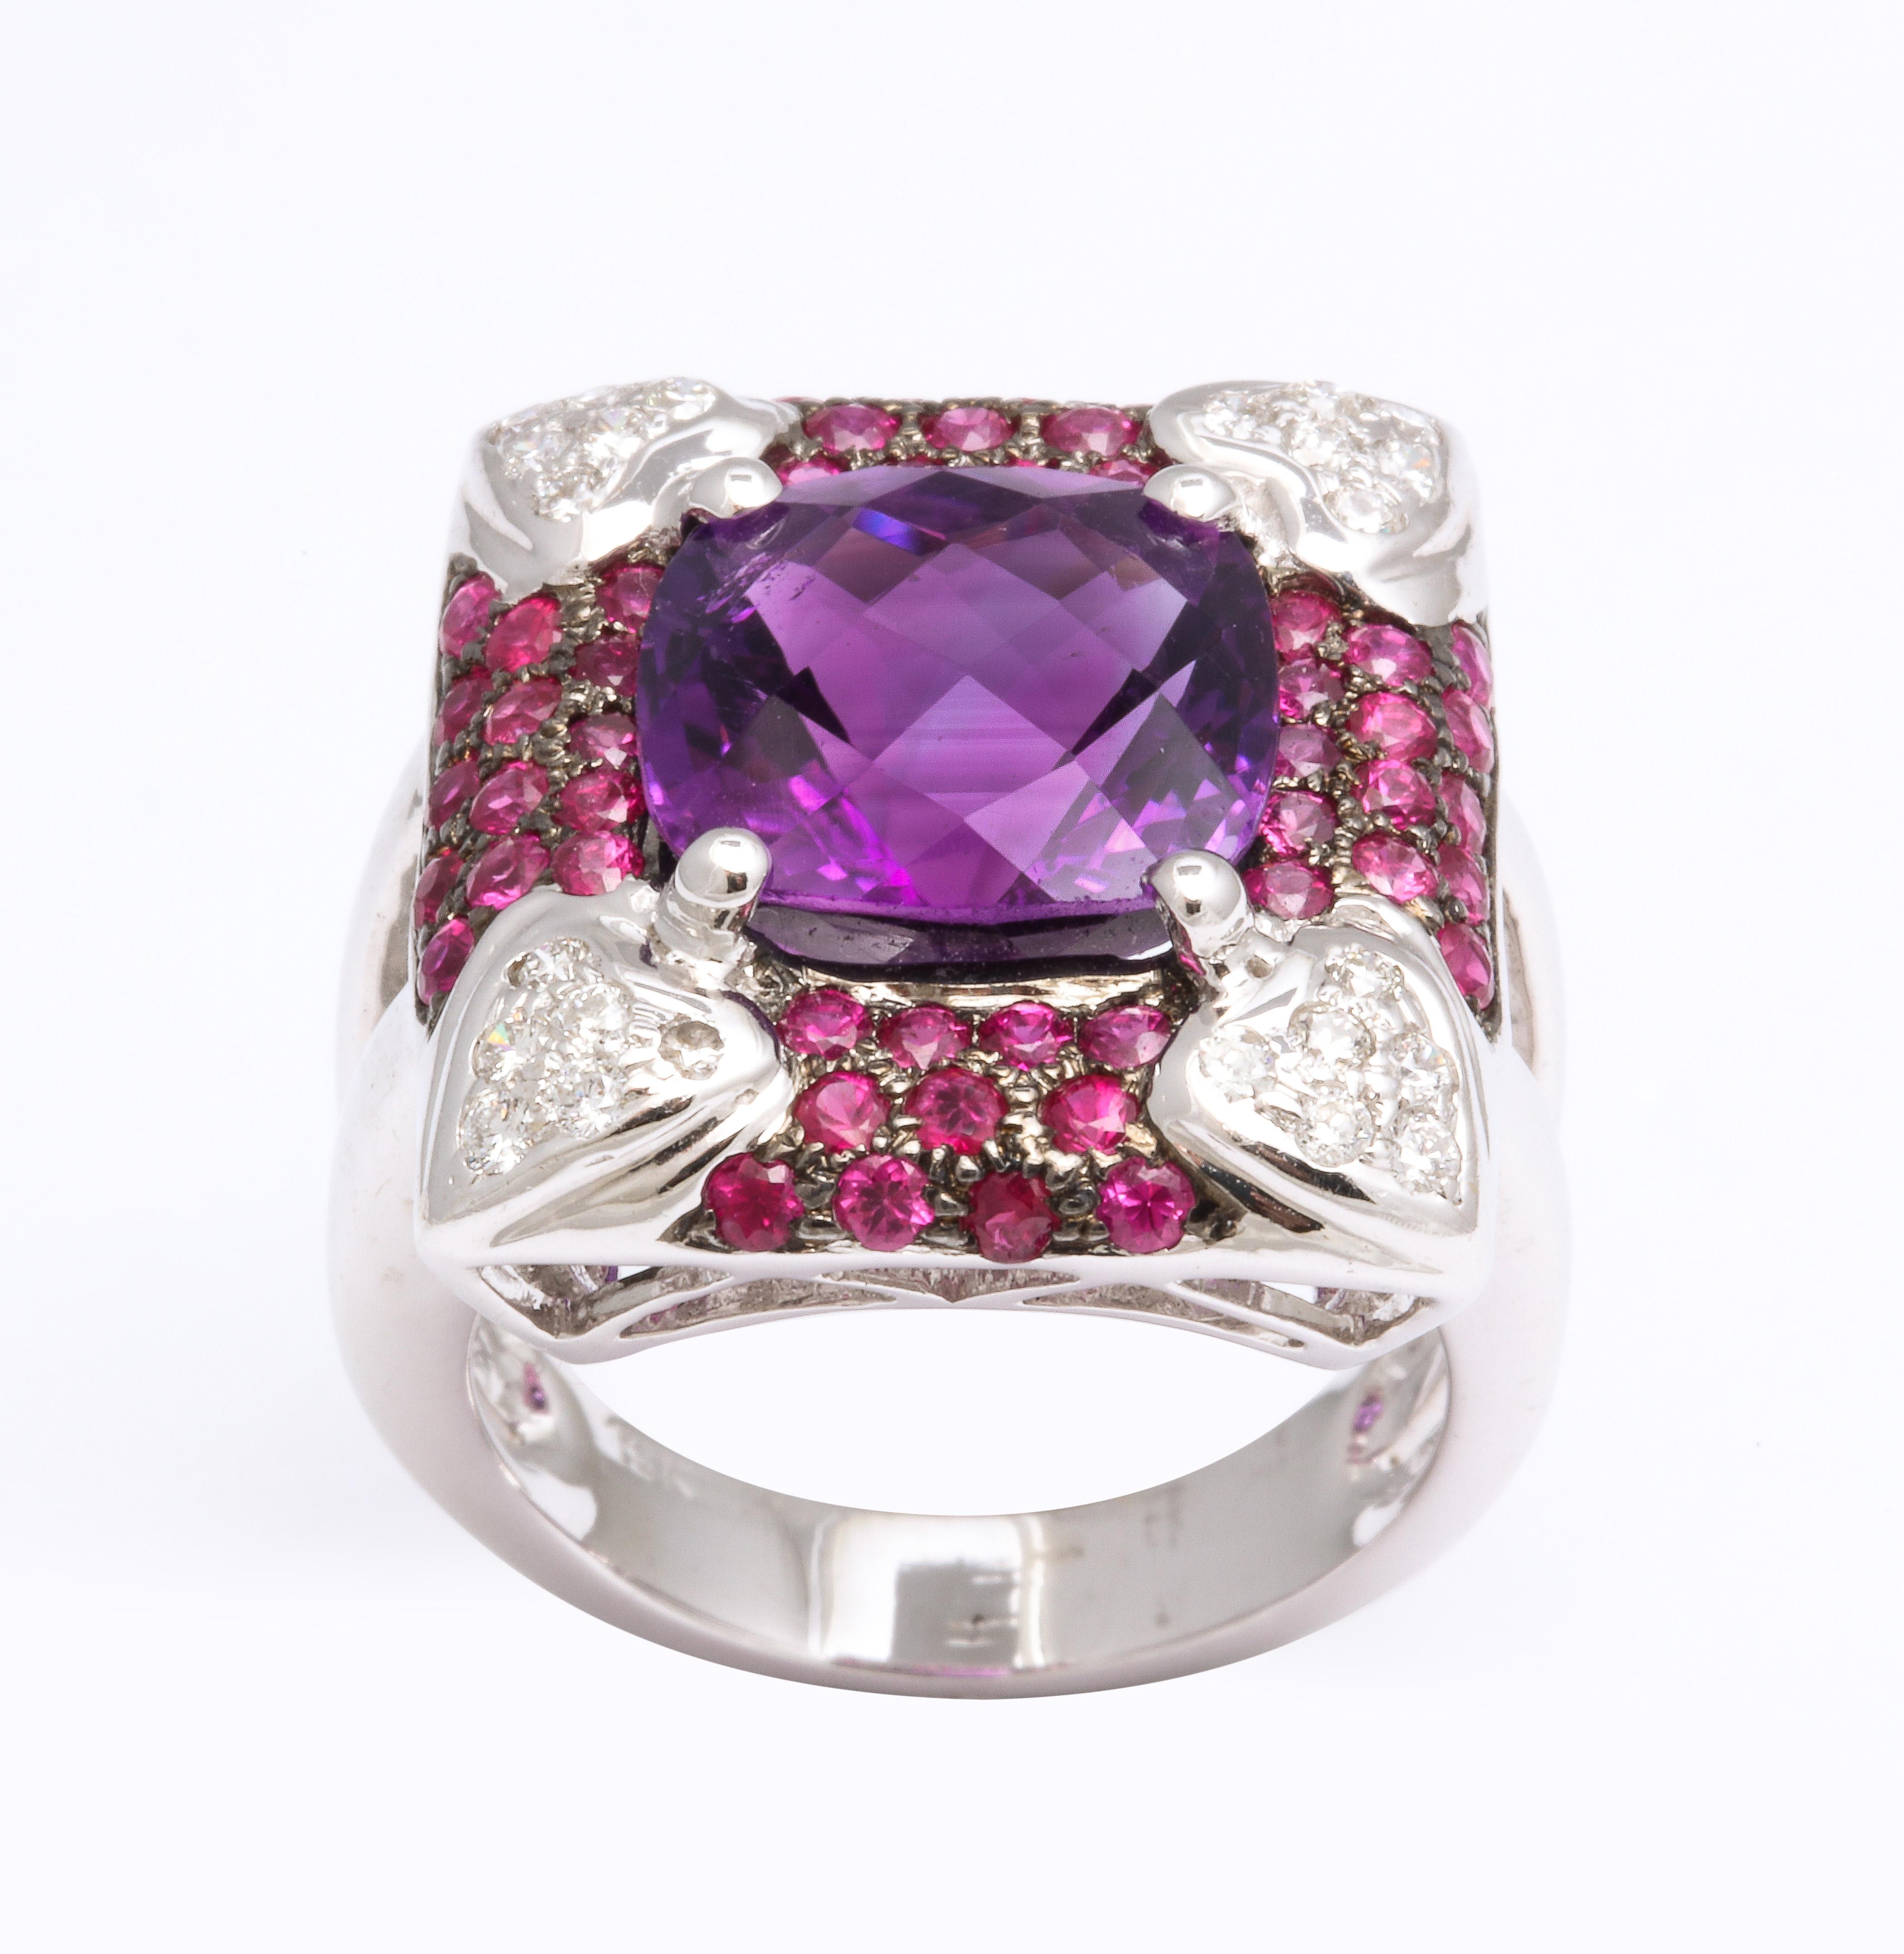 
A one of a kind ring, beautifully designed.

Center 5.51 carat cushion cut Amethyst.

The center stone is set in an 18k white gold ring encrusted in 1.29 carats of Ruby and .35 carats of diamonds in heart shape designs. 

Currently a size 6.5, this